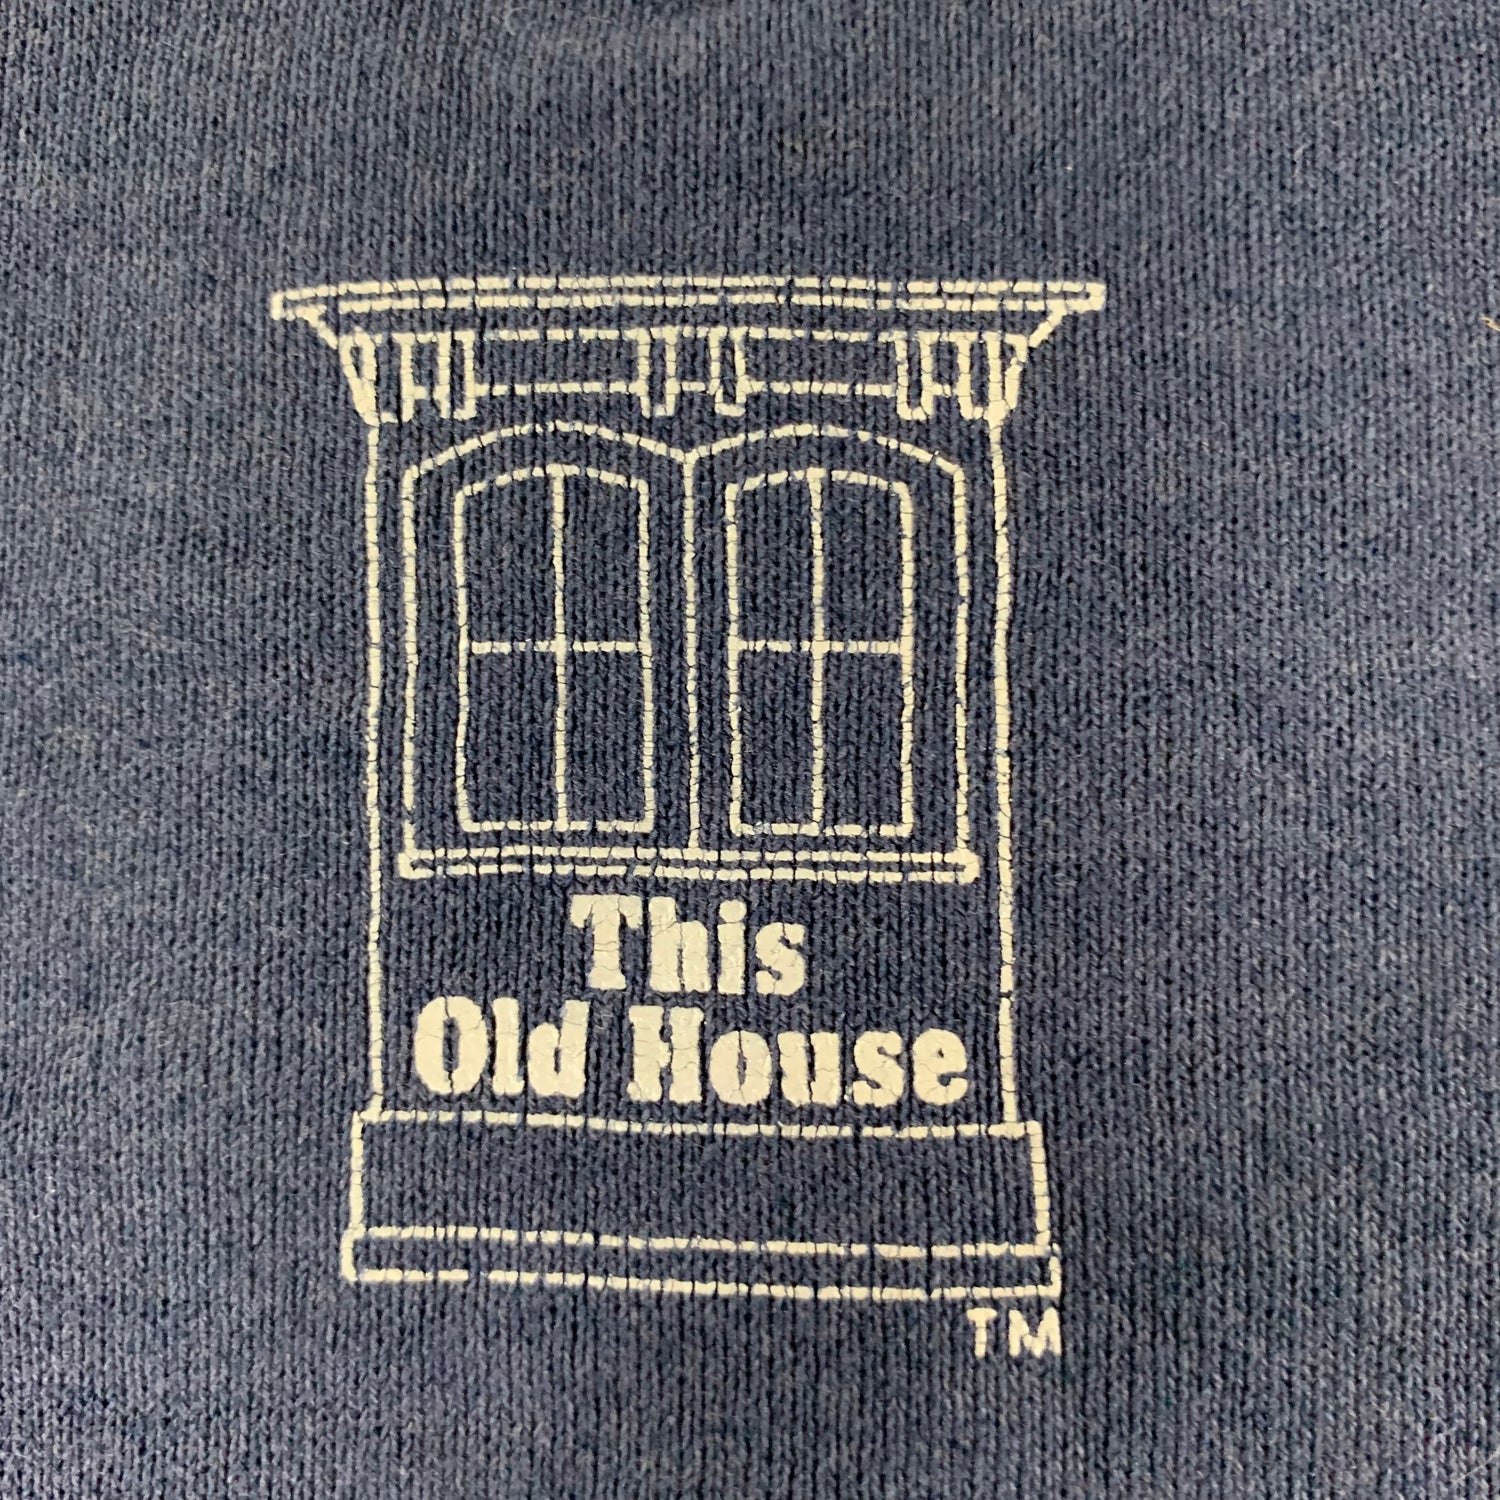 Vintage 1990s This Old House Sweatshirt size XL